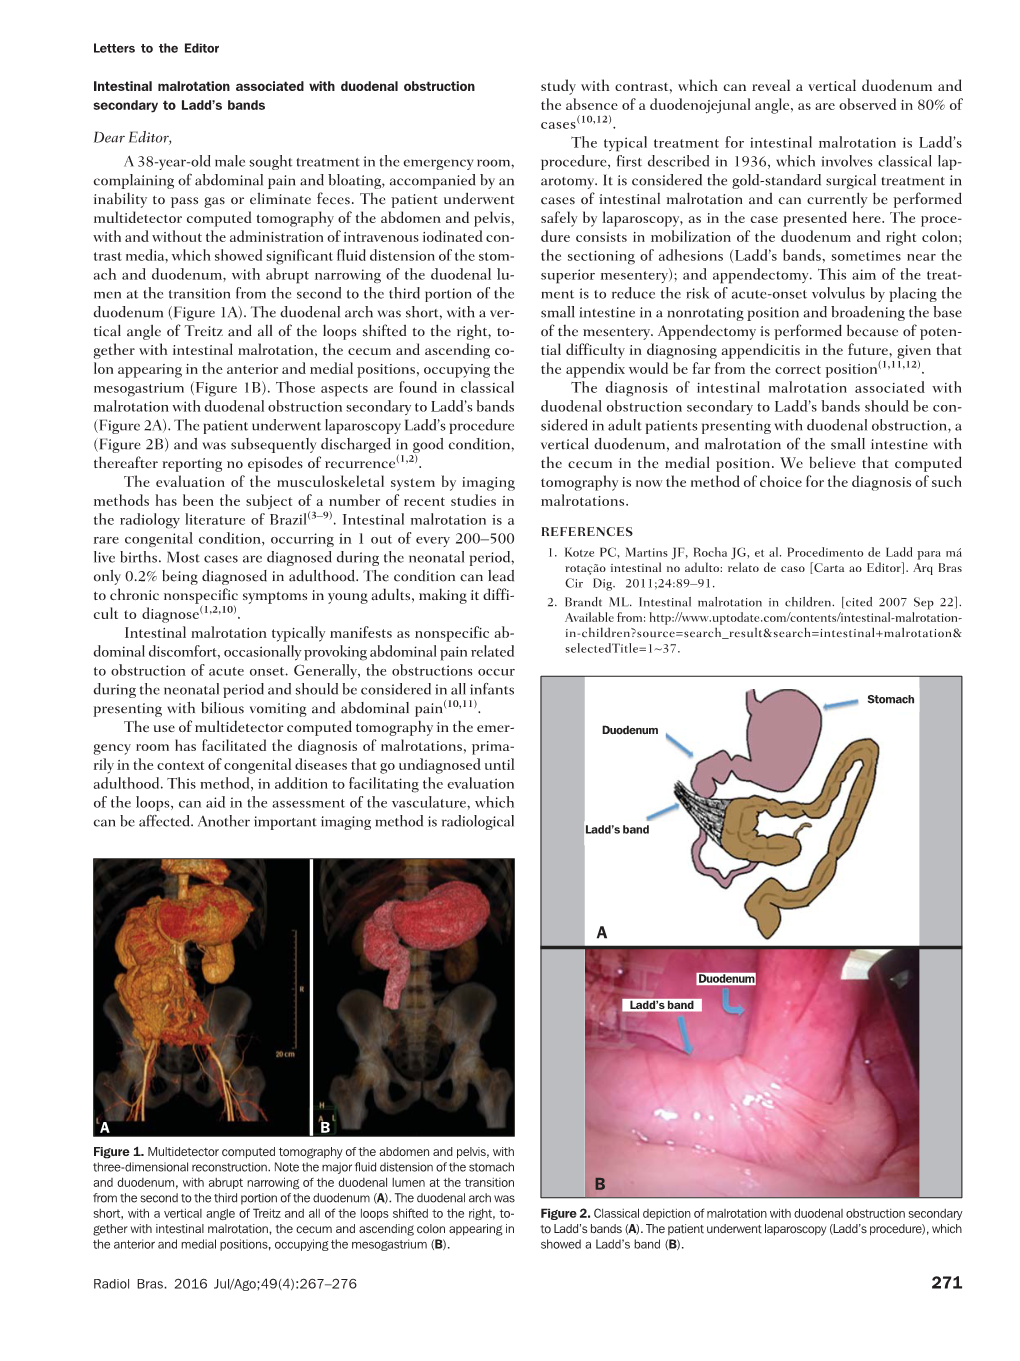 Intestinal Malrotation Associated with Duodenal Obstruction Secondary To